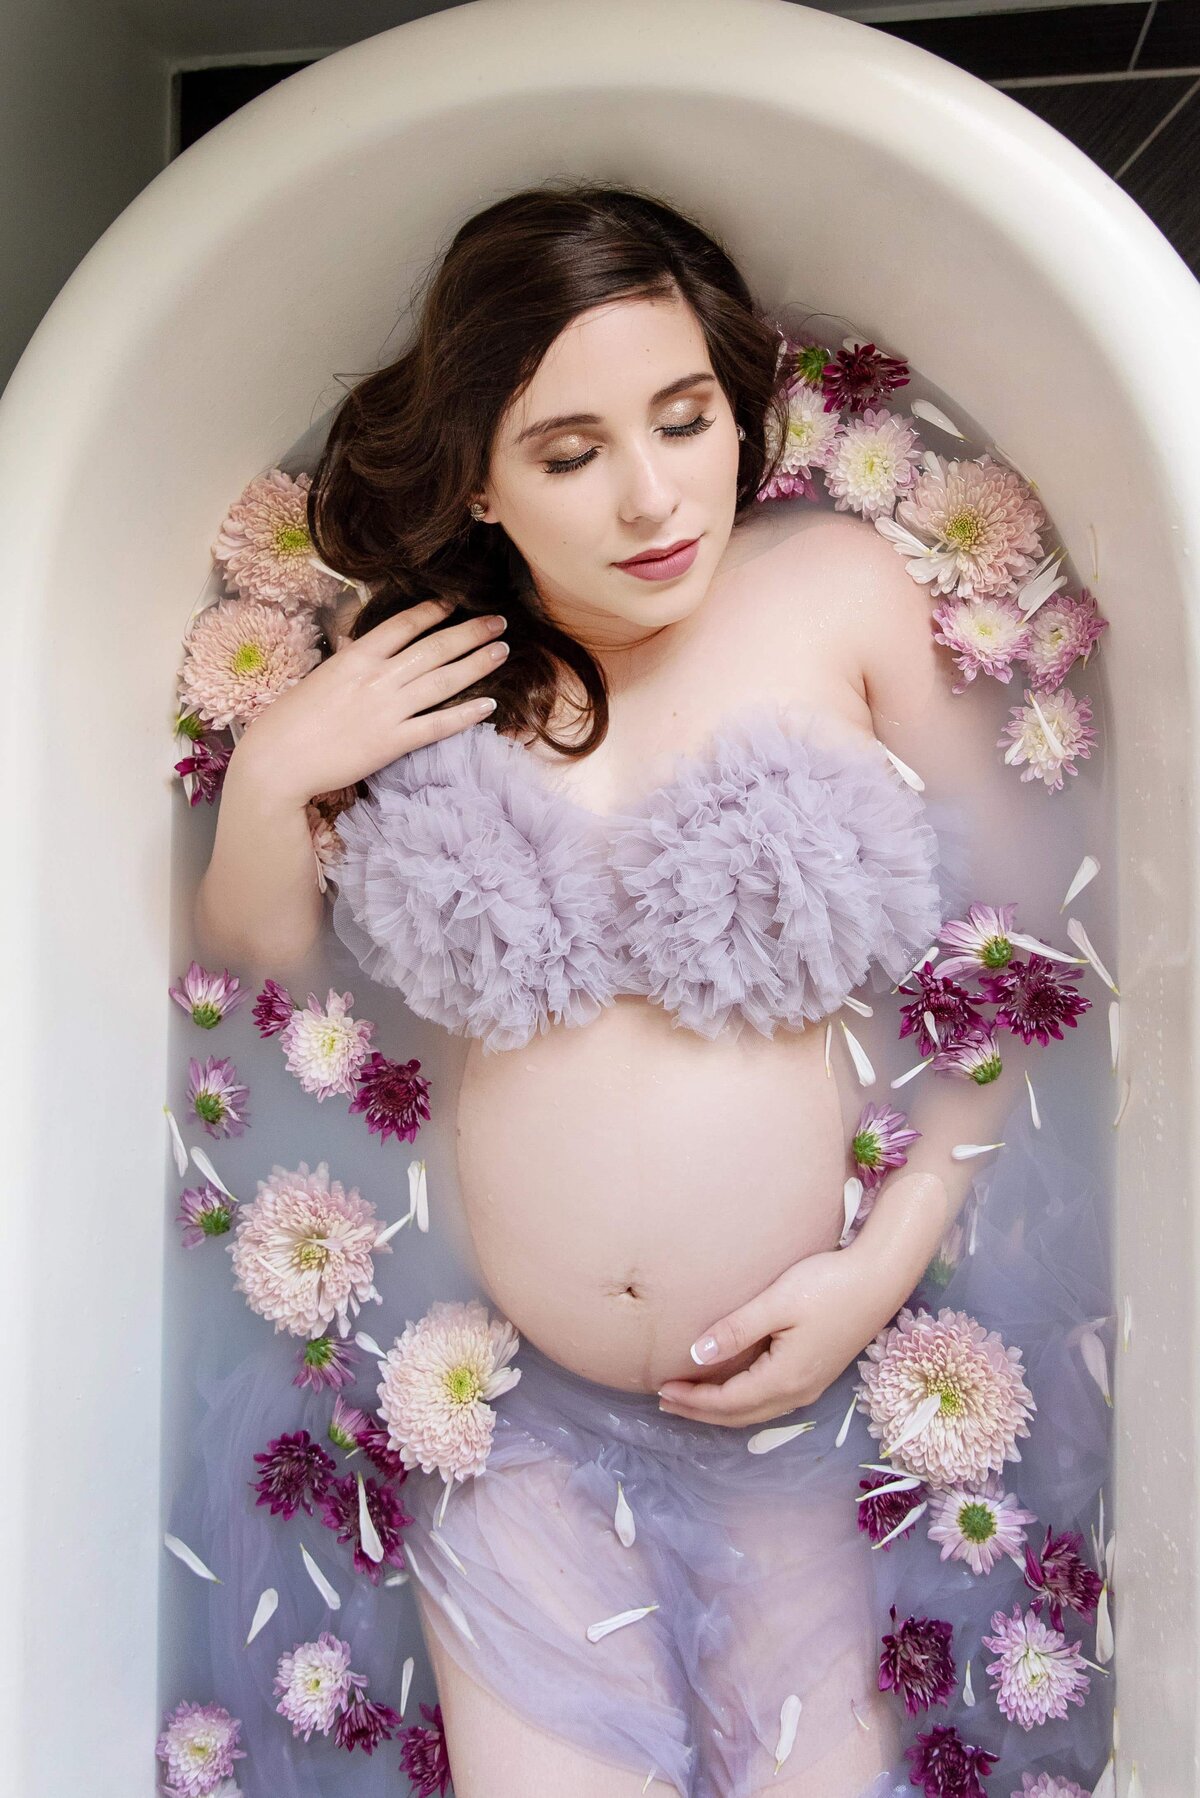 st-louis-maternity-photographer-pregnant-mom-wearing-purple-ruffle-top-in-milk-bath-with-purple-flowers